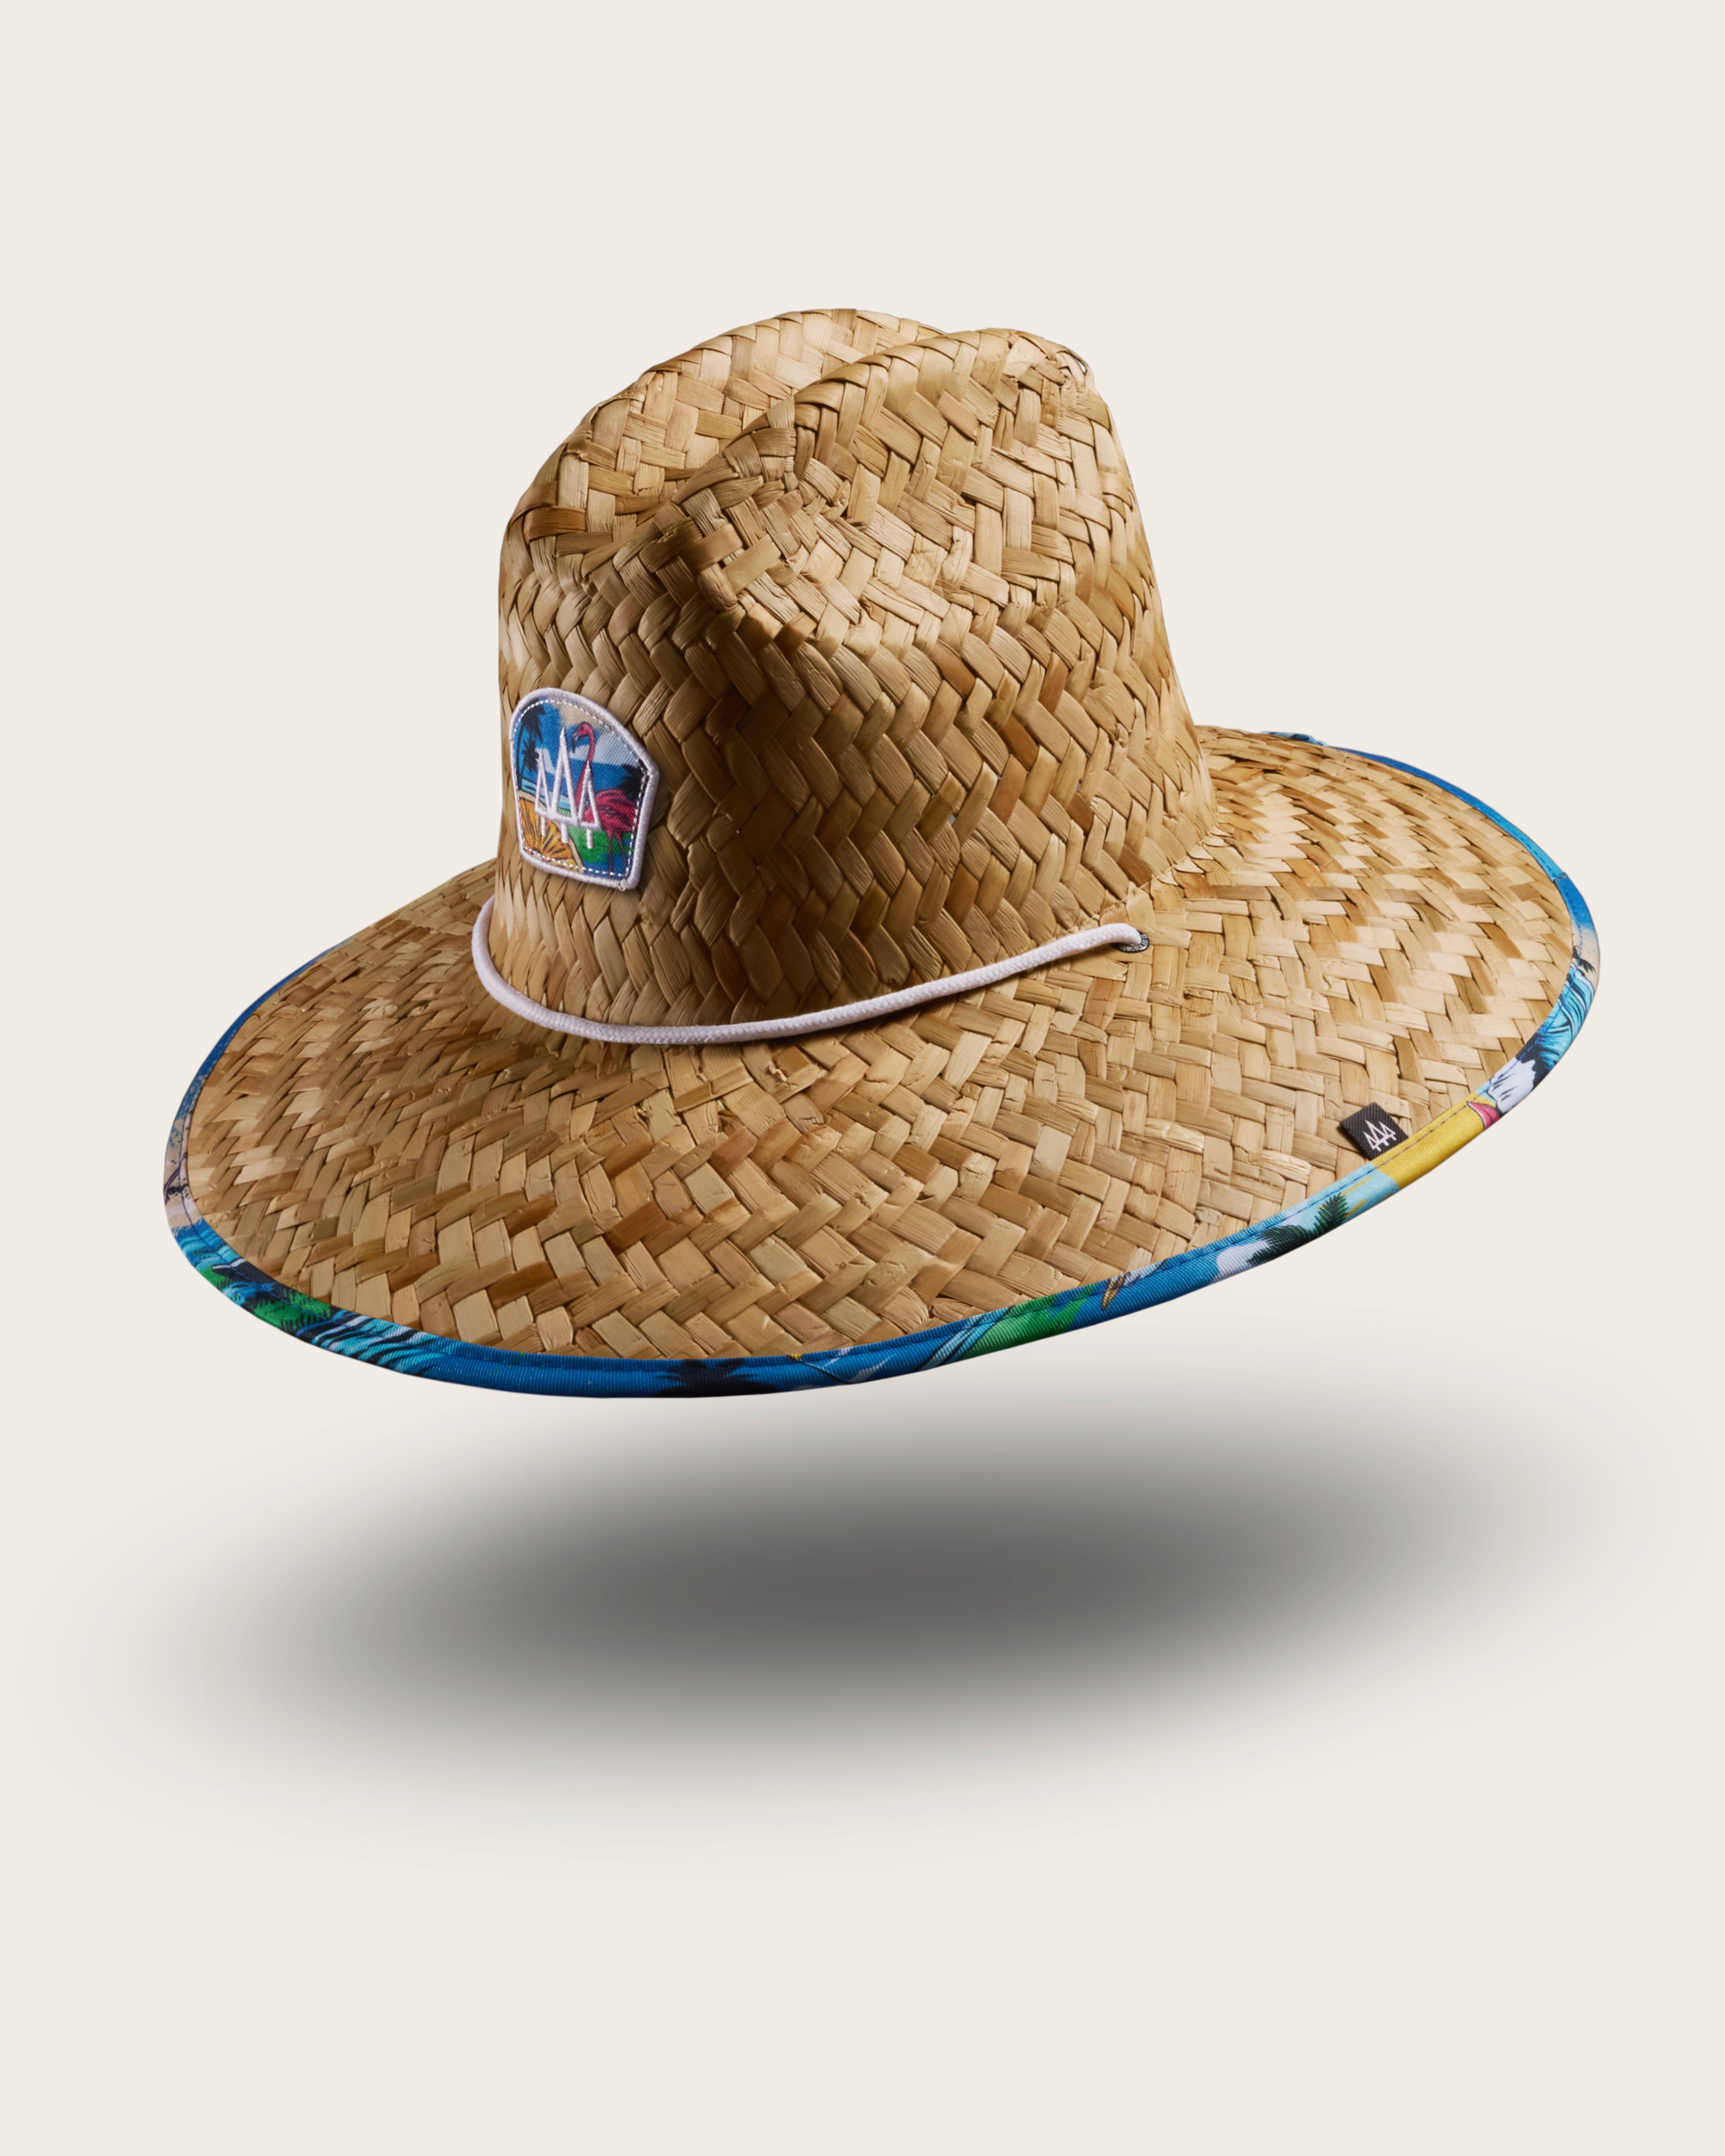 Hemlock Seaside straw lifeguard hat with beachside pattern with patch